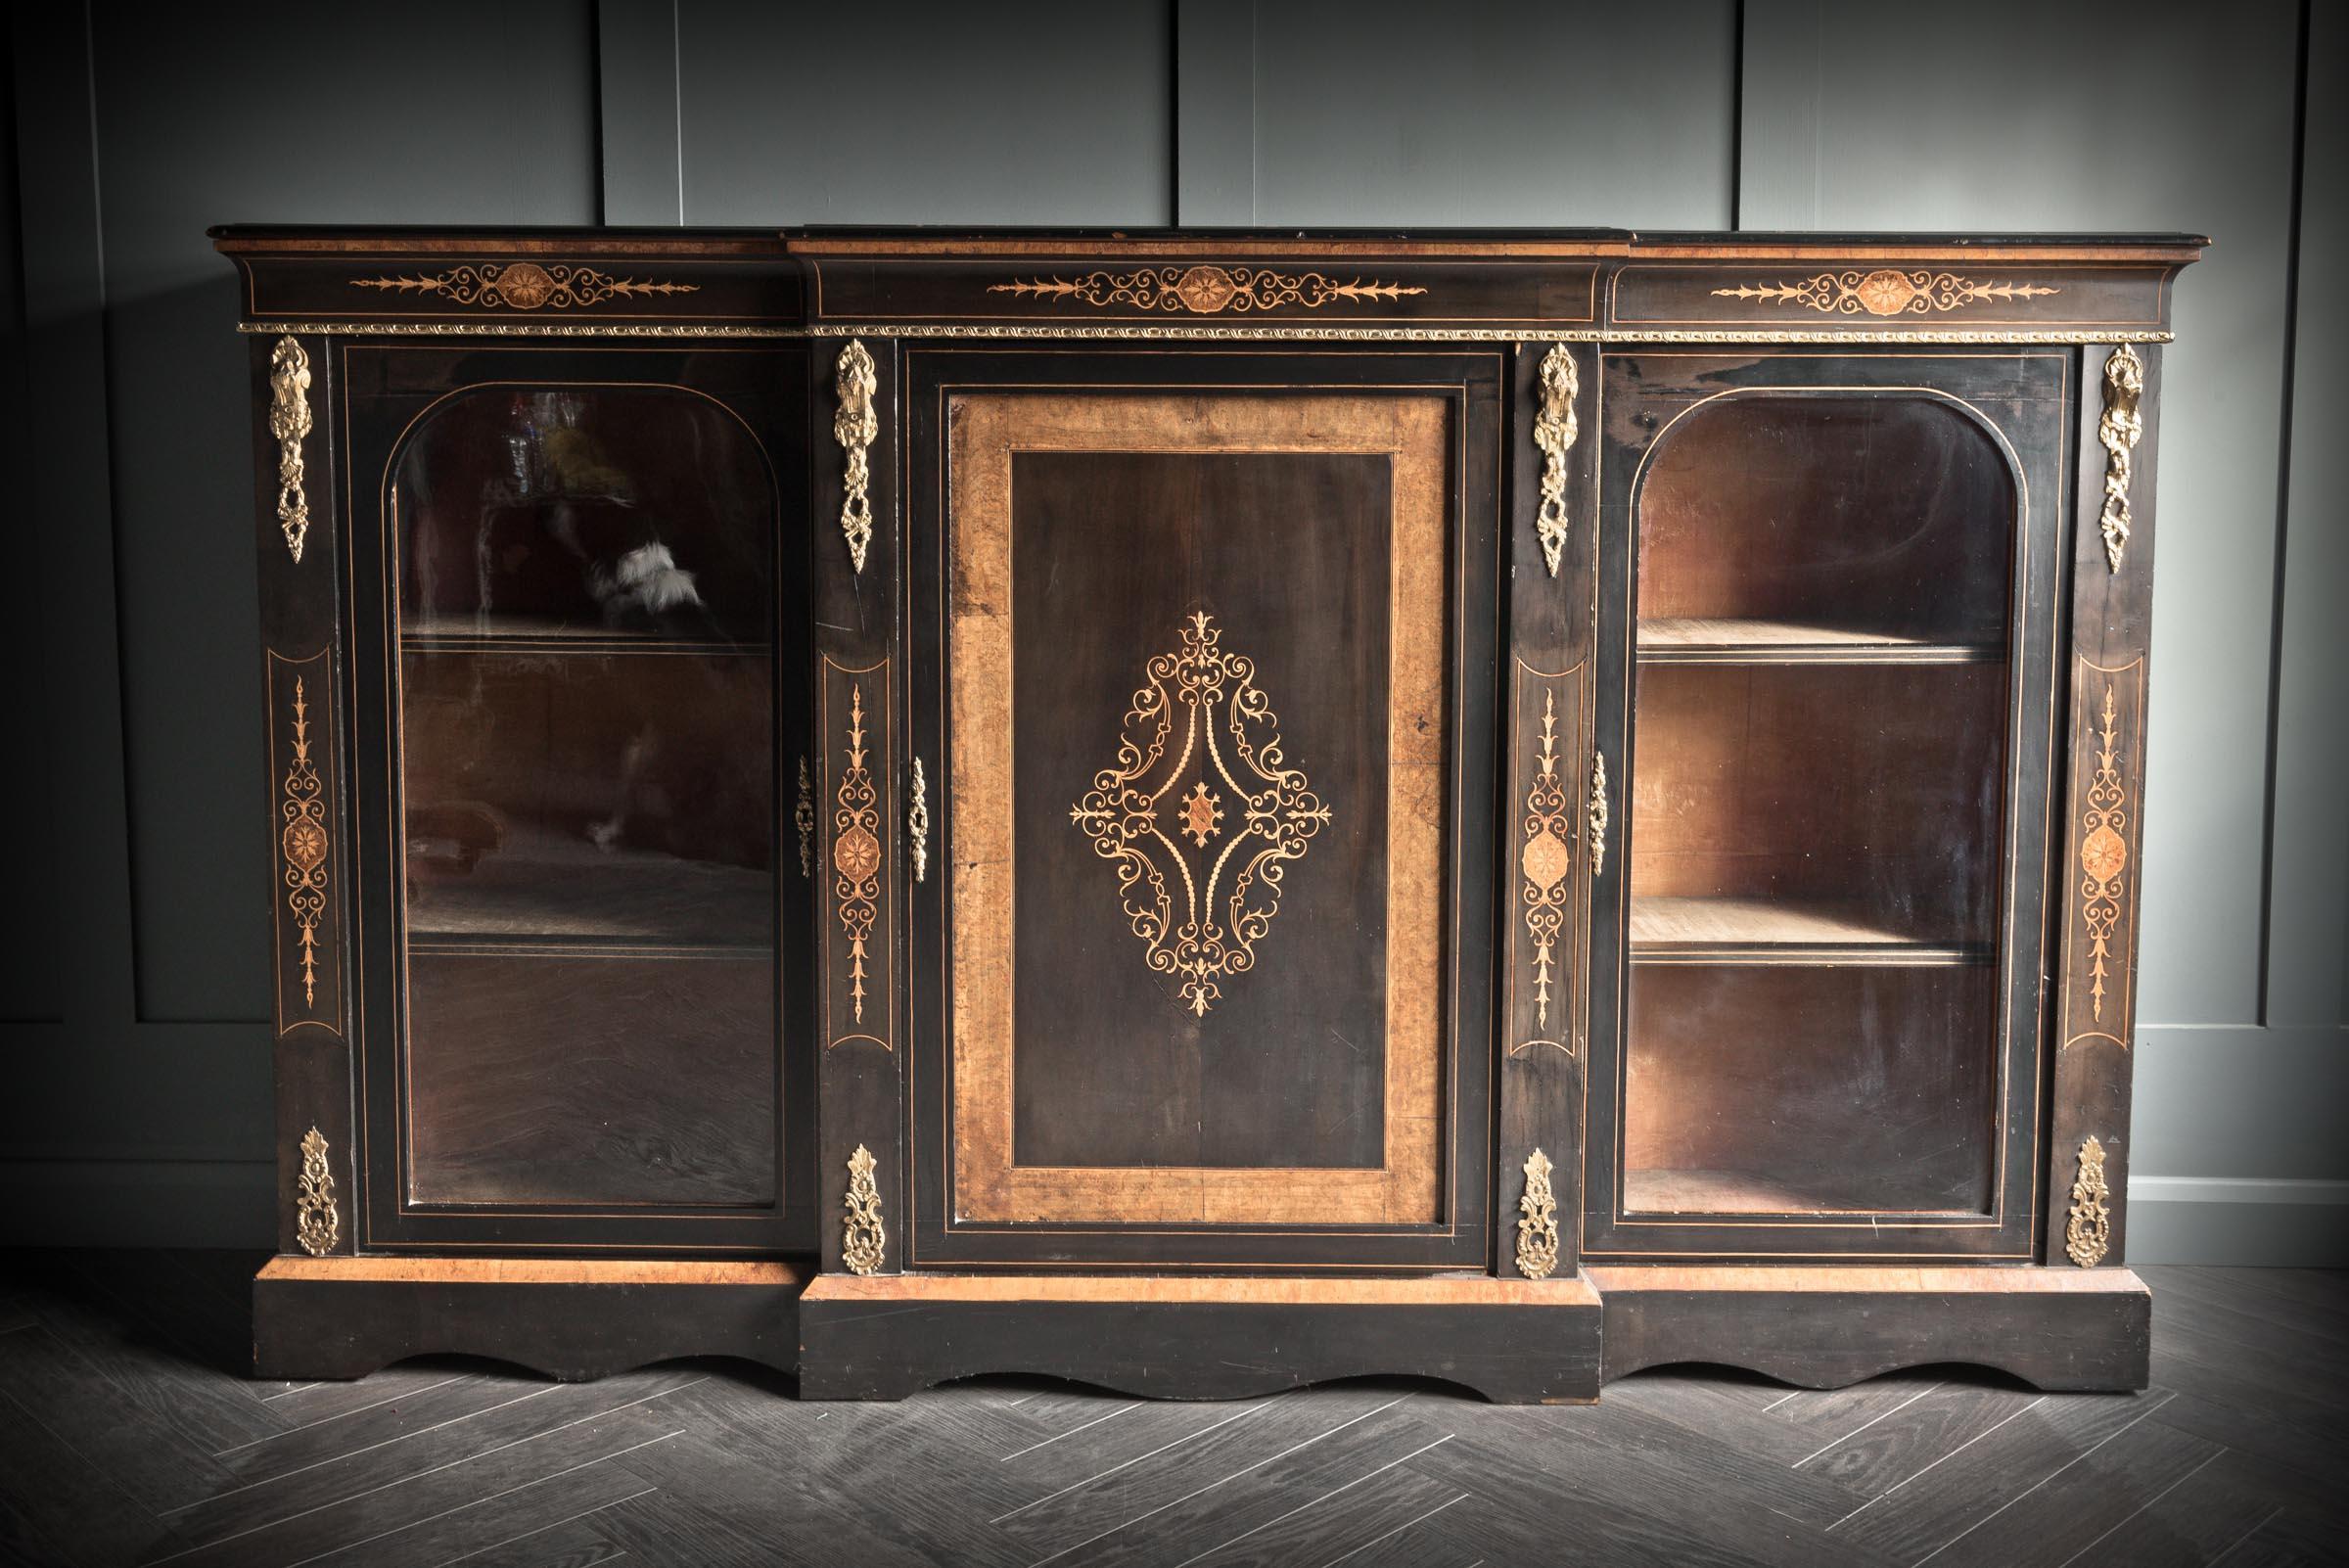 This stunning, ebonised bronze decorated three door Credenza is the work of a master craftsman during the mid-Victorian period.
The central door is decorated with a gold design. It is flanked by two glazed doors with built in shelves. The doors